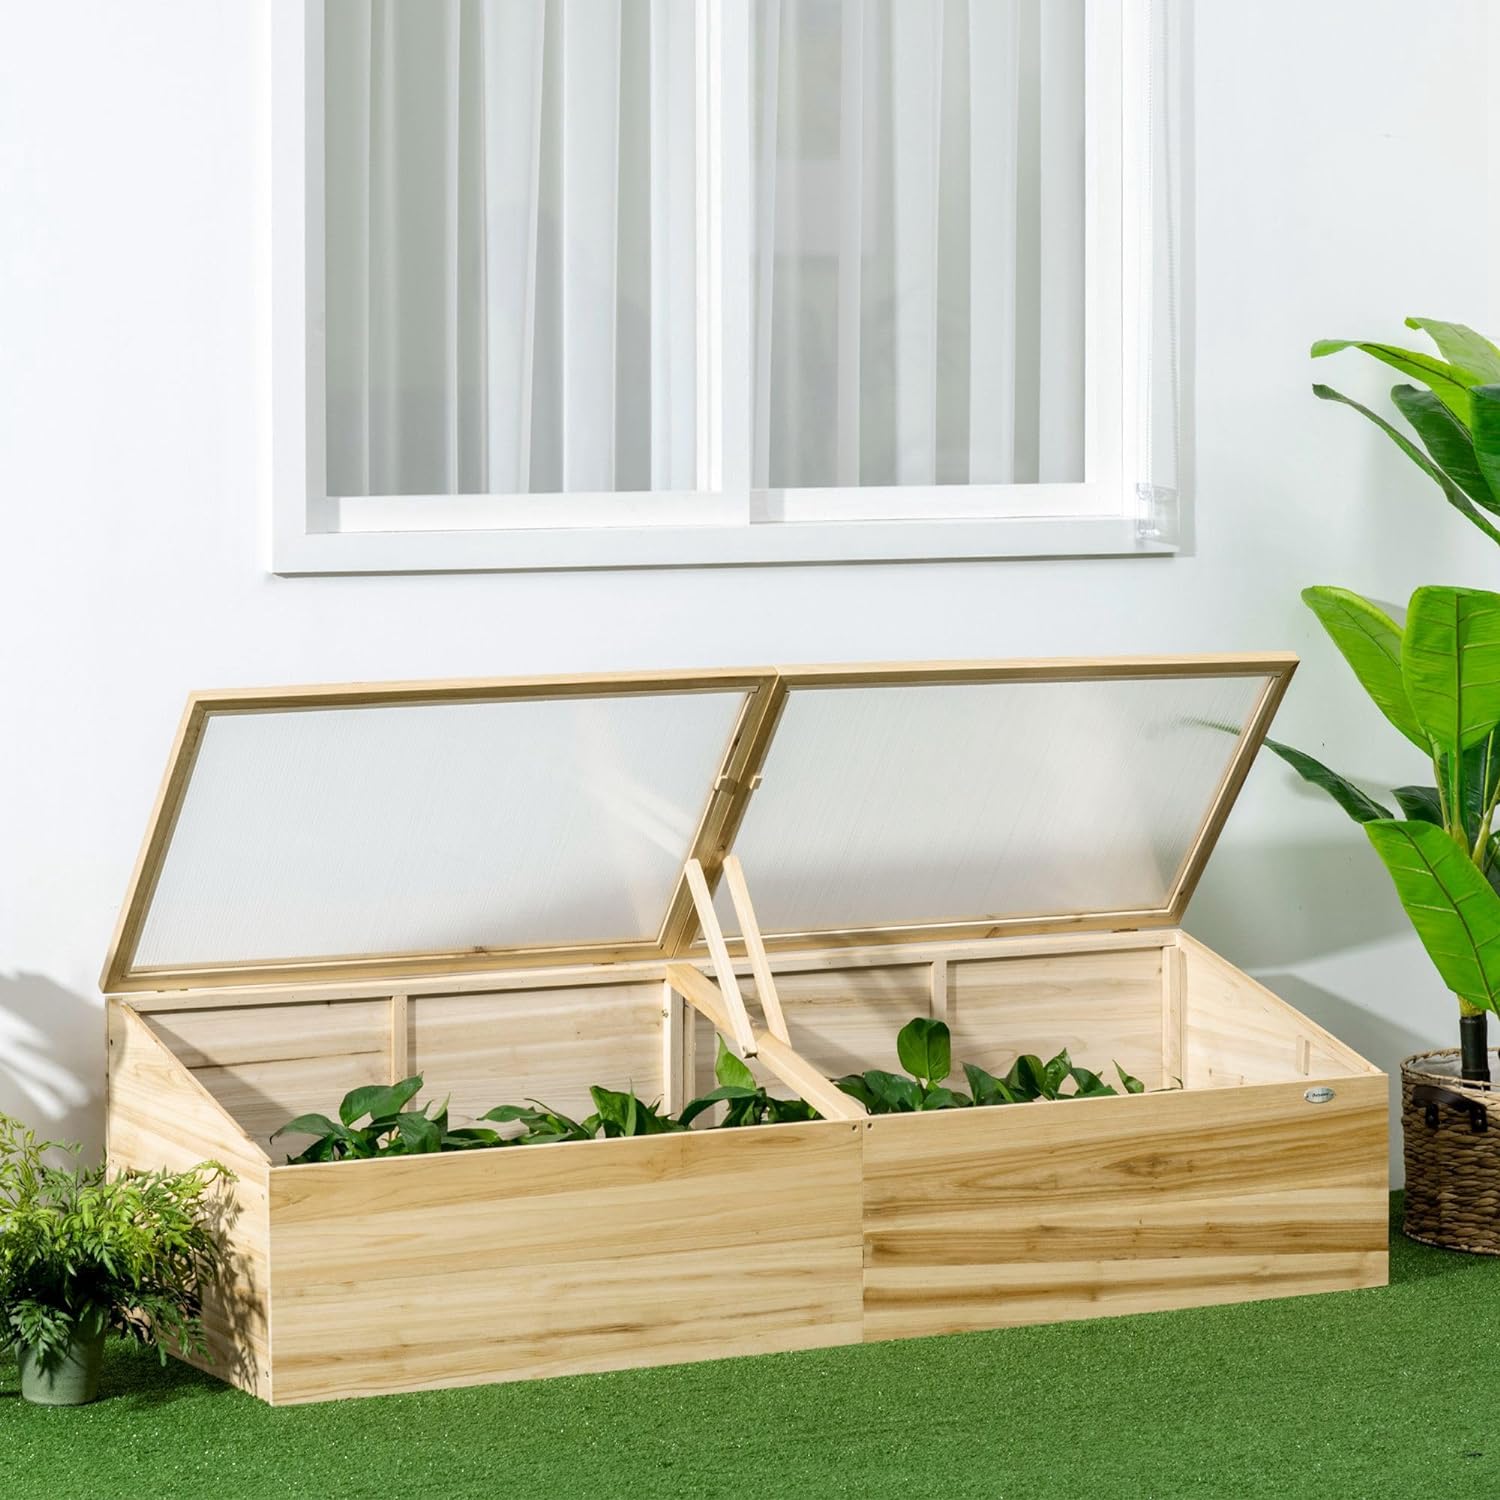 Outsunny Wooden Cold Frame with Openable Roof, Portable Mini Greenhouse for Indoor, Outdoor, Flowers, Vegetables, Plants, 66.9x19.7x17.7 - Natural